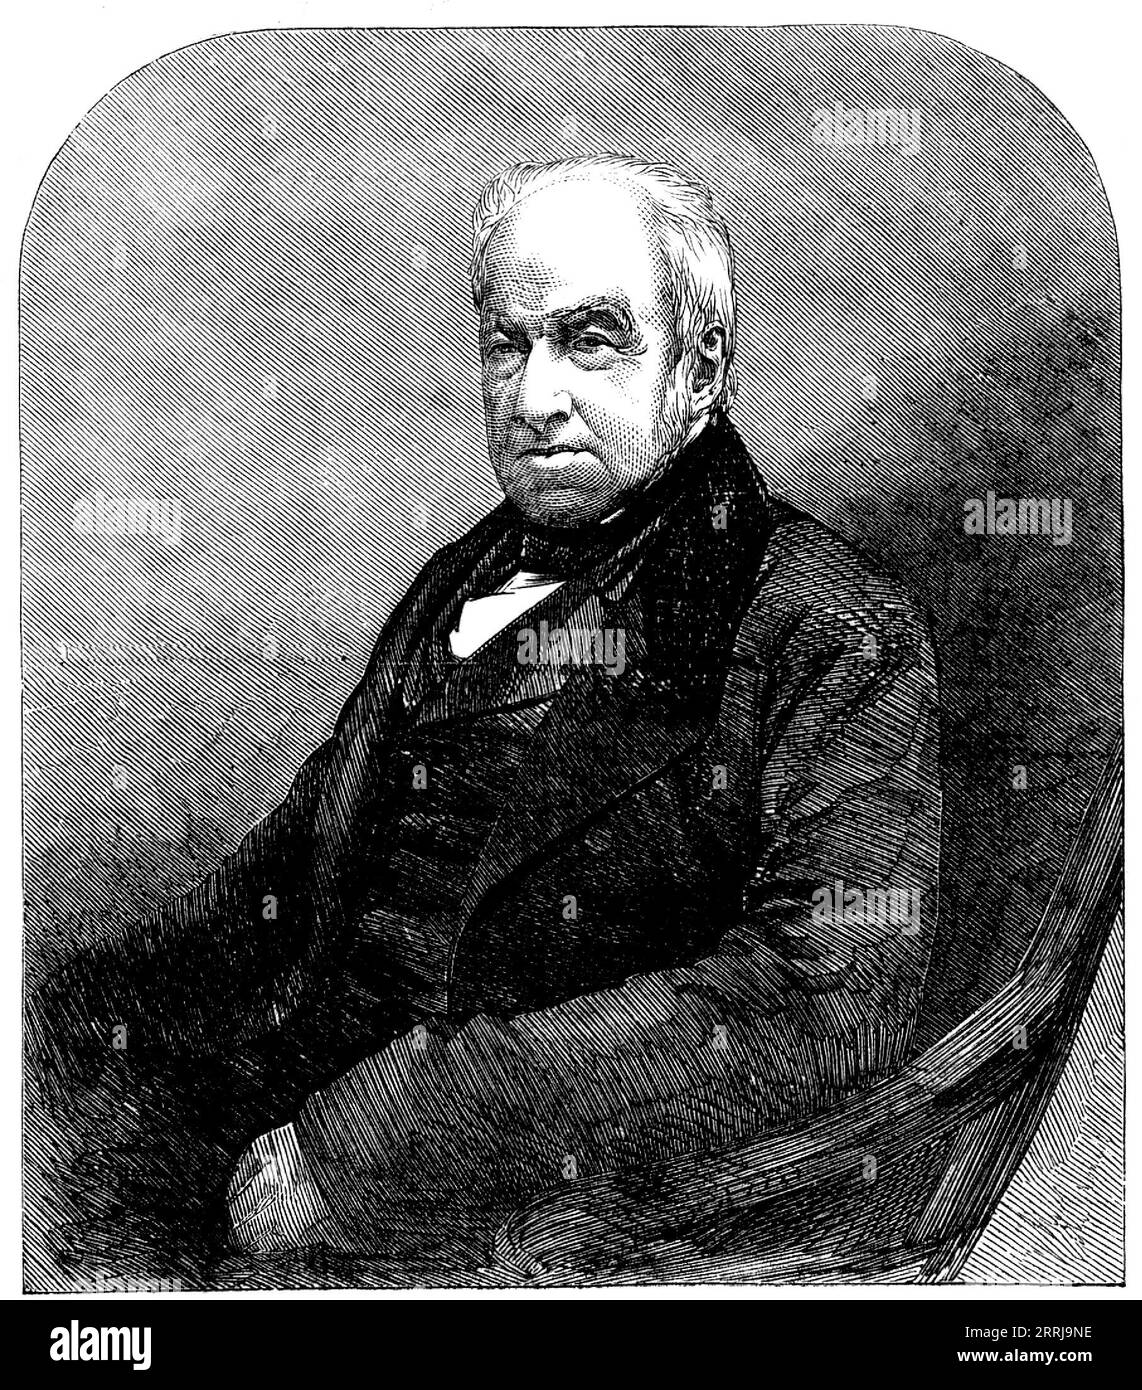 The Late Mr. Robert Brown, Keeper of Botany in the British Museum, from a photograph by Maull and Polyblank, 1858. Engraving from a photograph by Maull and Polyblank. On Sir Joseph [Banks]'s recommendation, and attracted by the more than golden promise which the then unexplored regions of New Holland held out to the botanical inquirer, [in 1801] he...embarked as naturalist in the expedition under Captain Flinders for the survey of the Australian coasts...By the use of the microscope, and the conviction of the necessity of studying the history of the development of the plant in order to ascerta Stock Photo